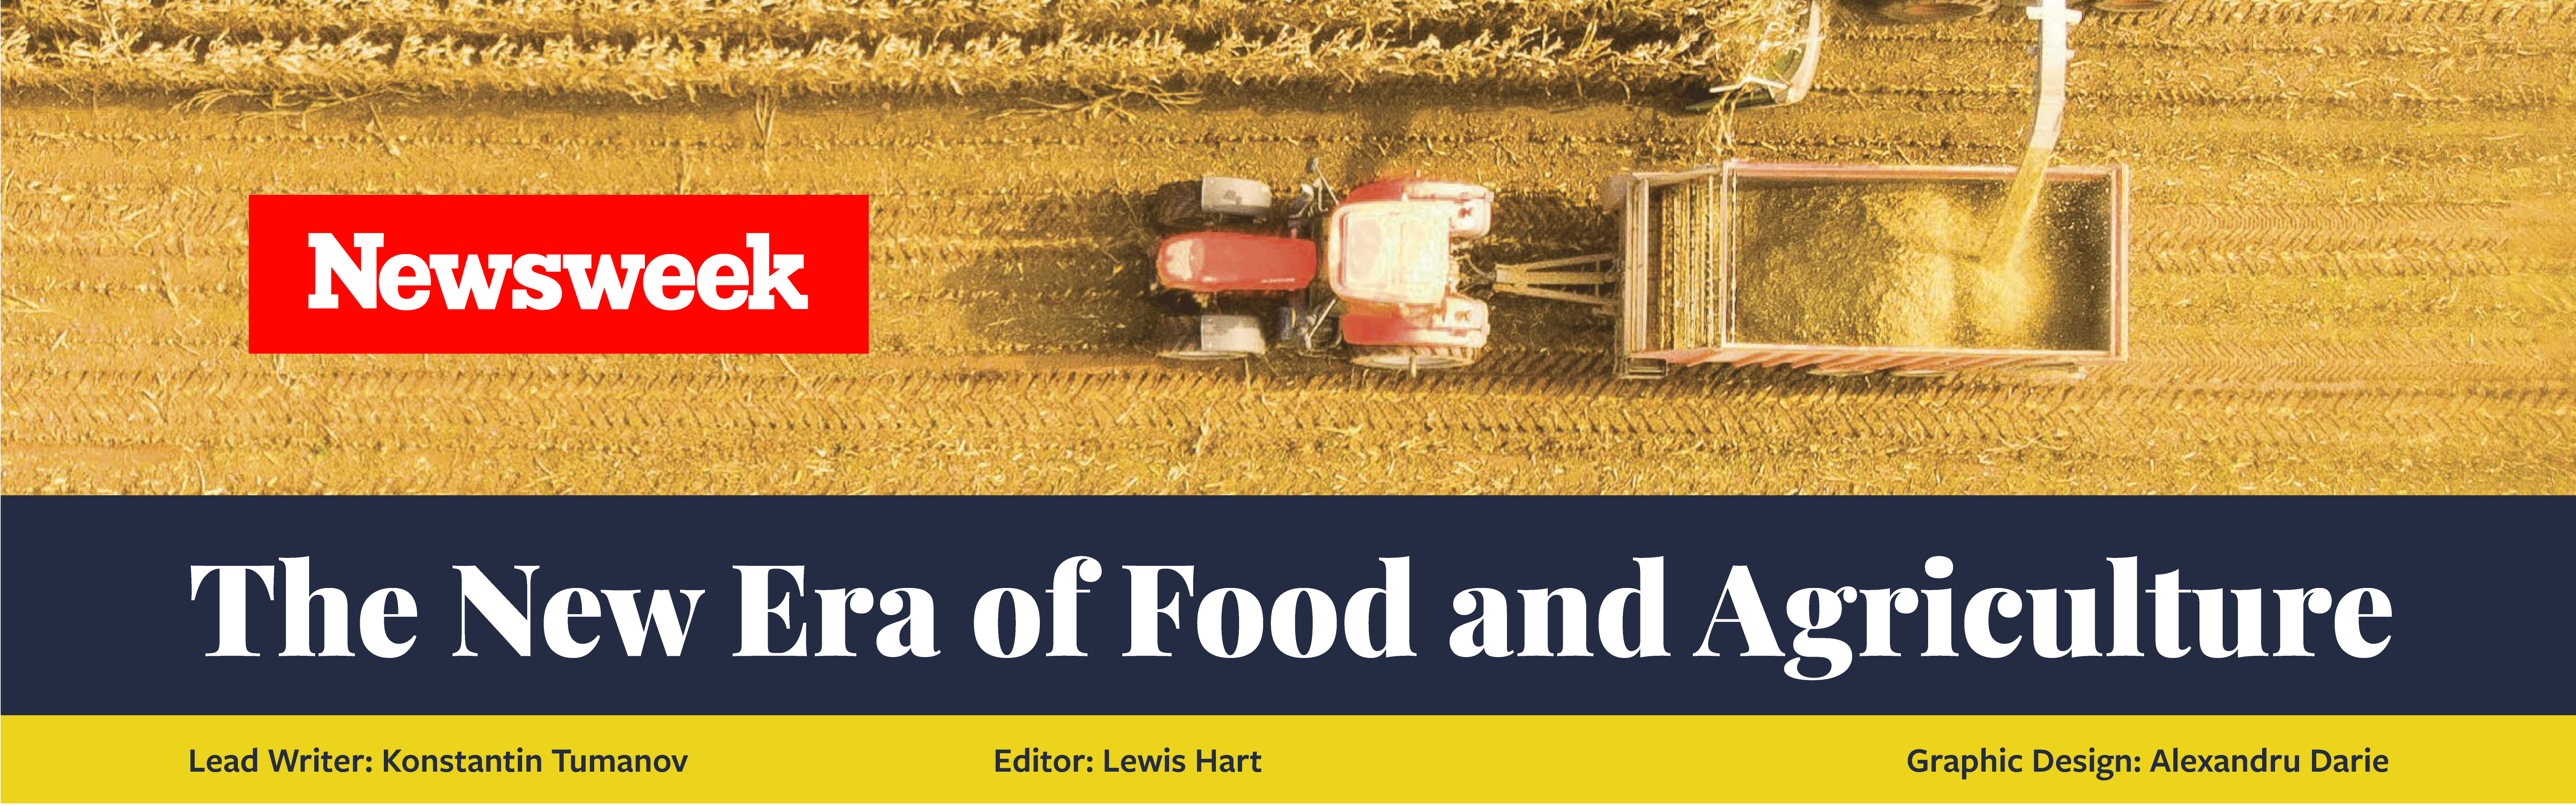 Image of grain harvest with text Newsweek The New Era of Food and Agriculture